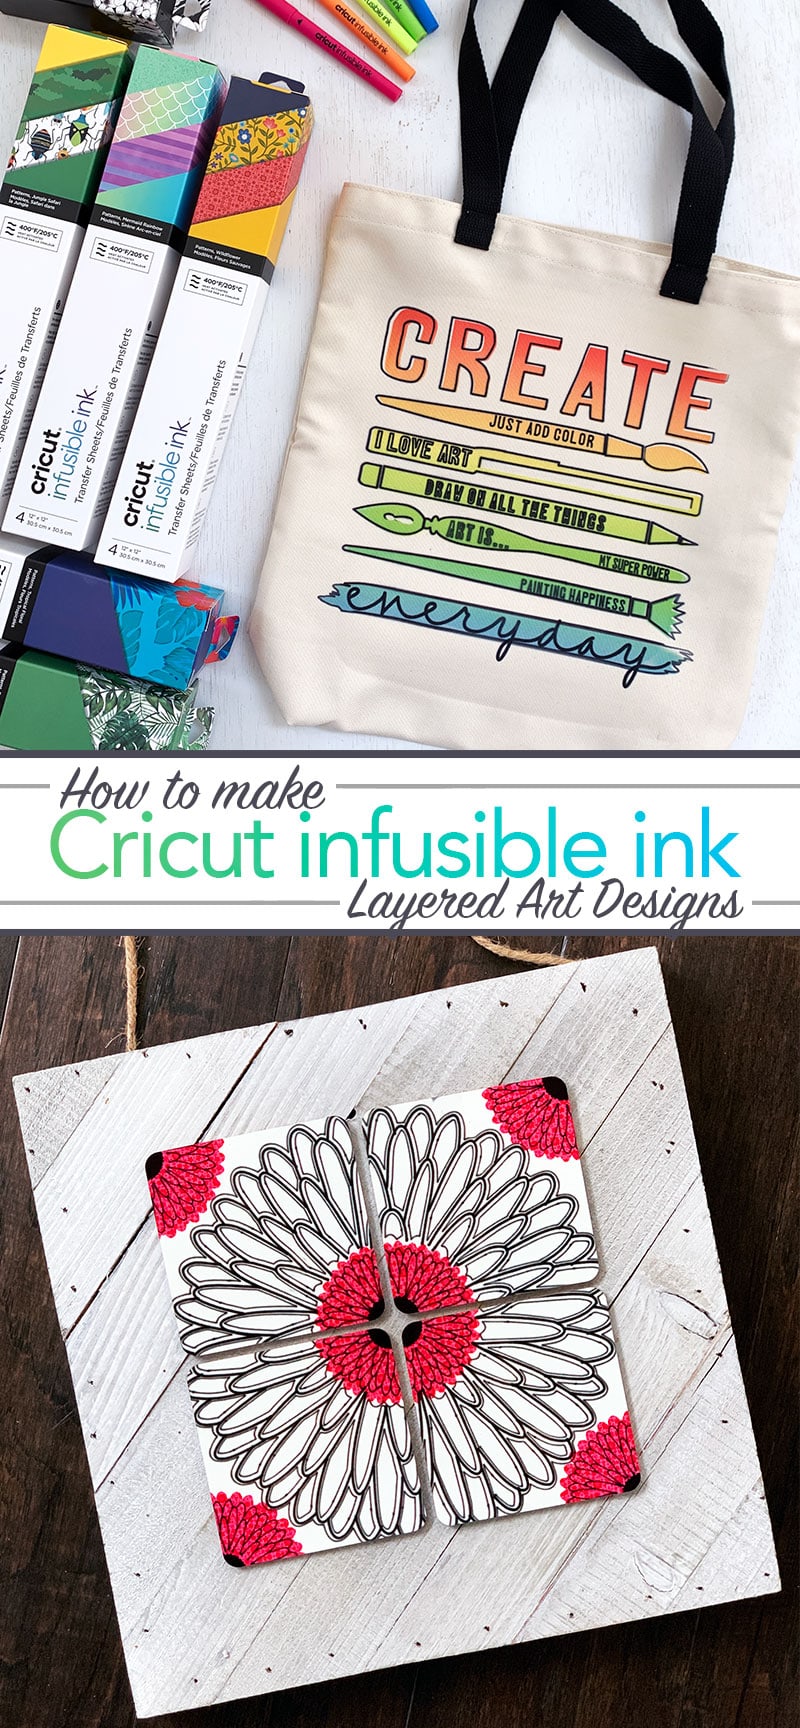 How to make Cricut Infusible Ink layered art designs - created by Jen Goode